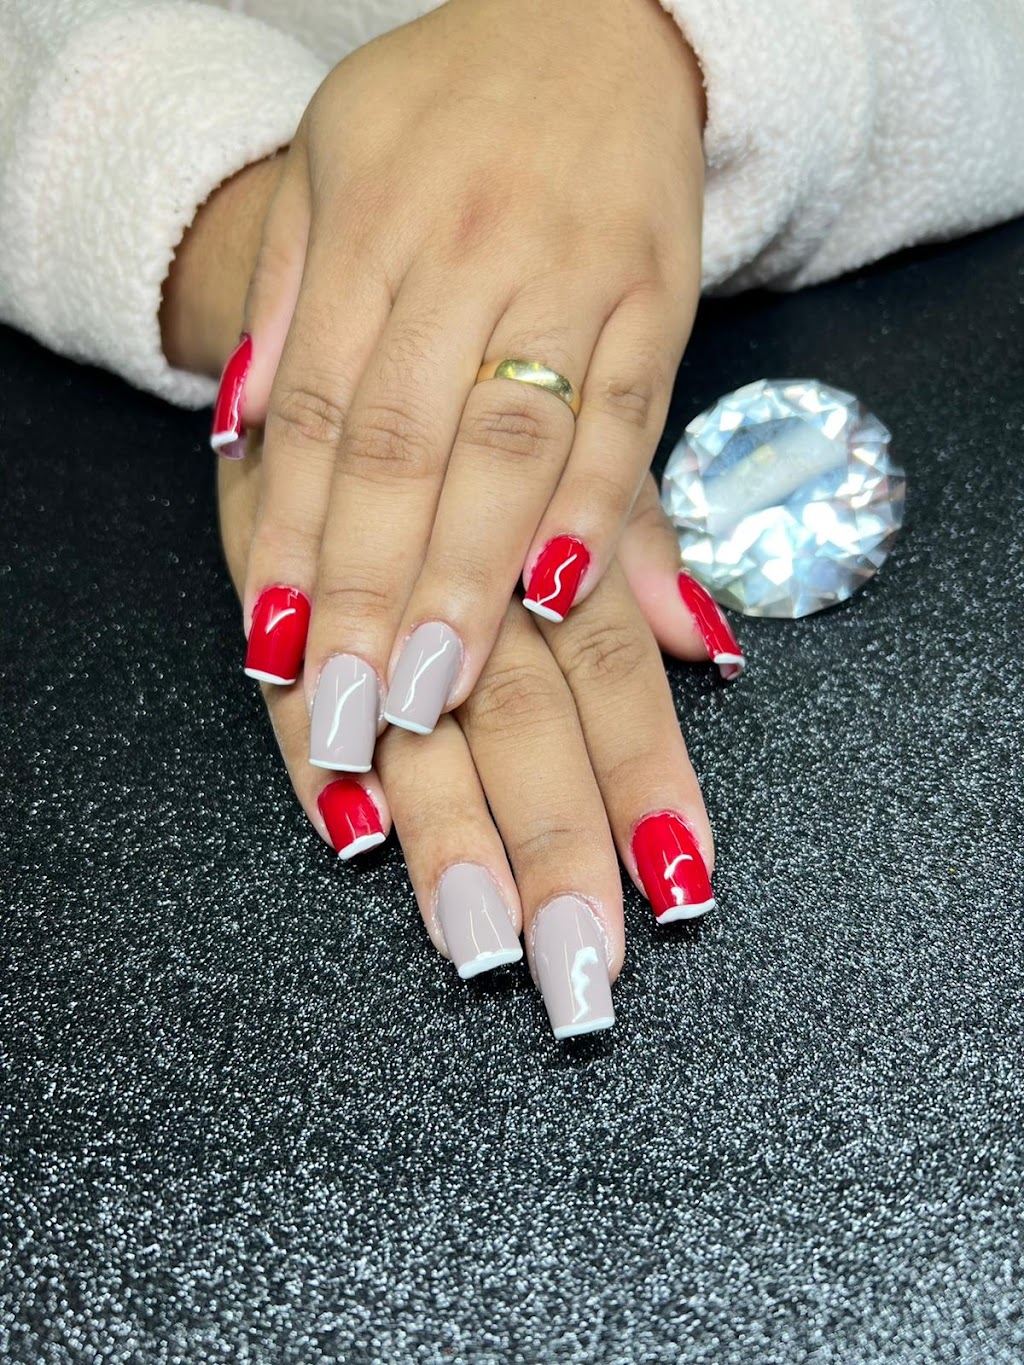 SOS Therapy Nails | beauty salon | 33 Werth St, Oakey QLD 4401, Australia | 0478023219 OR +61 478 023 219